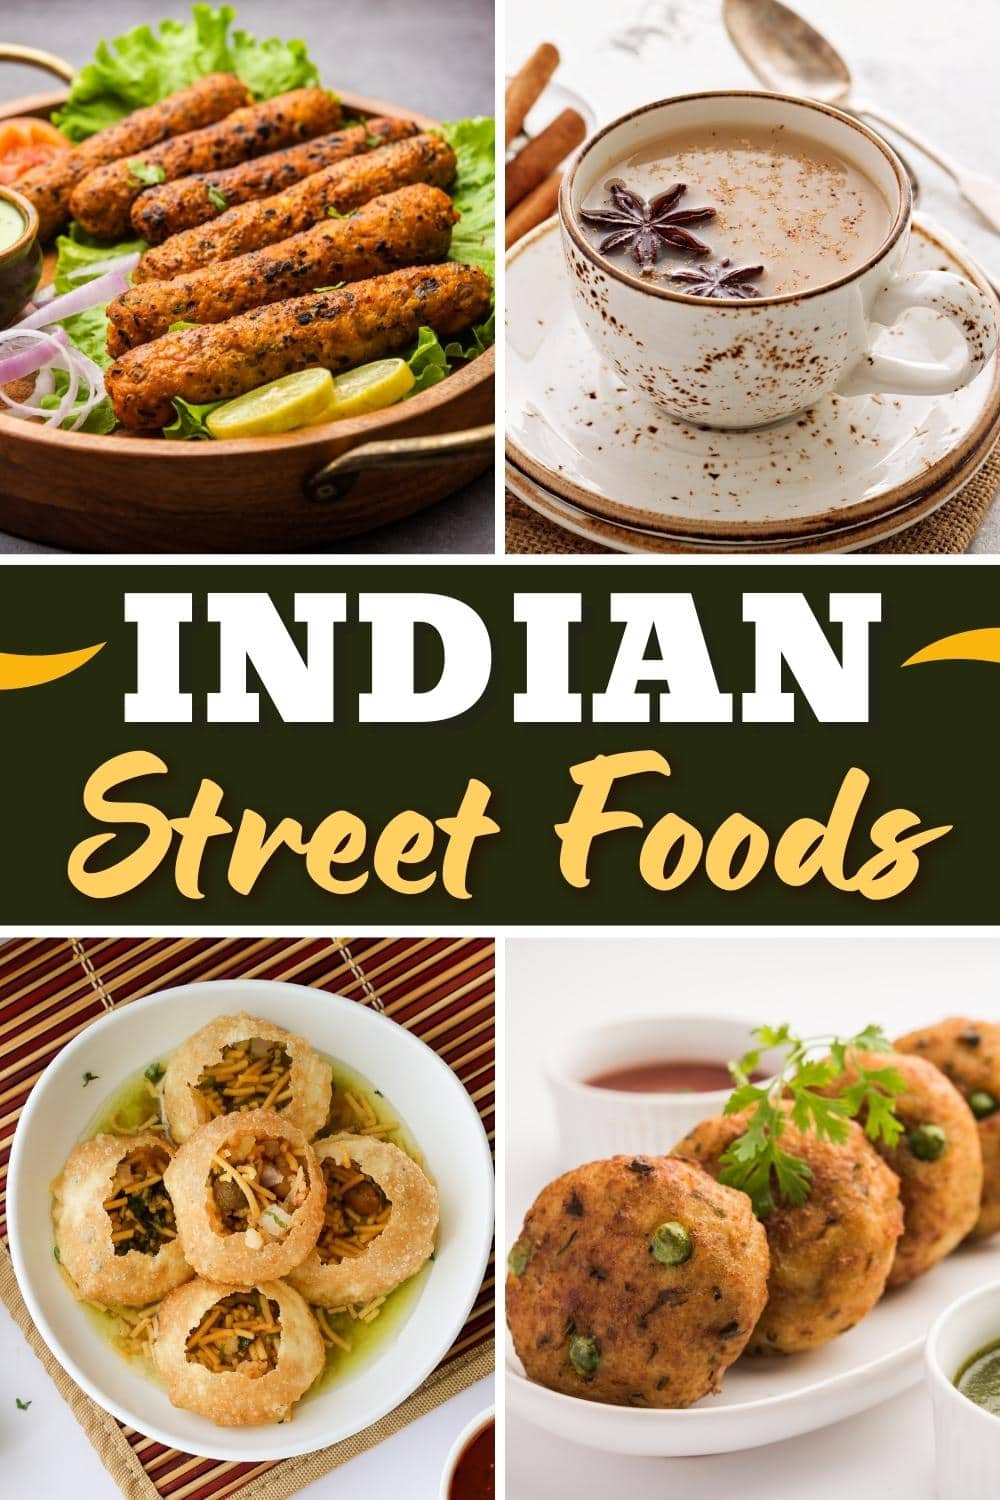 33 Popular Indian Street Foods Everyone Should Try - Insanely Good